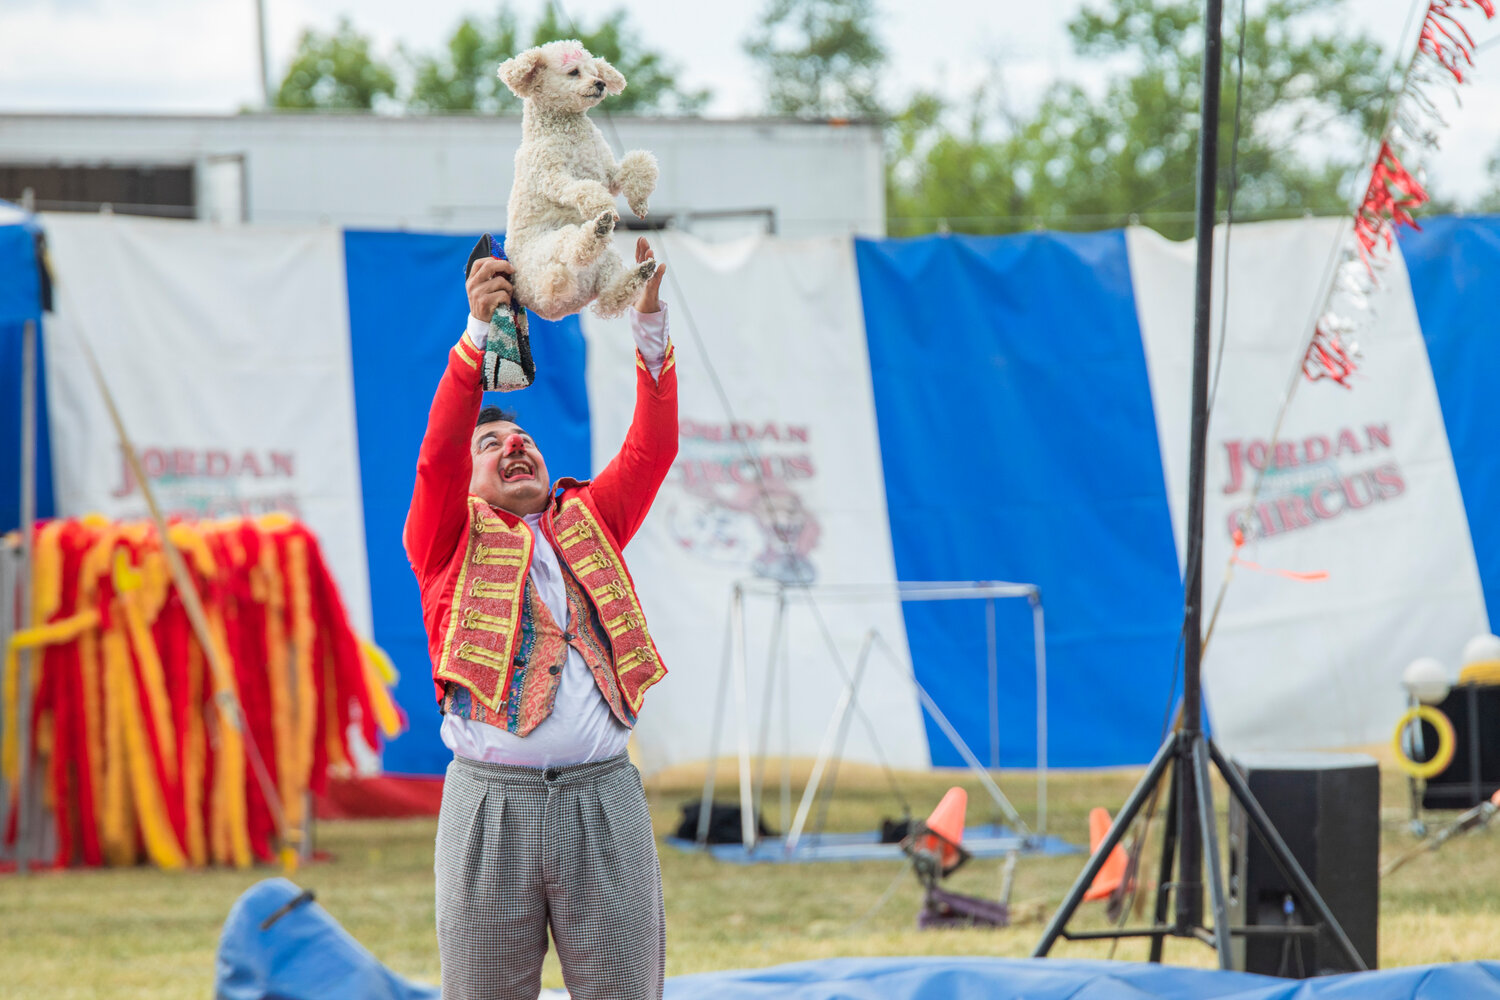 A circus clown tosses a poodle into the air as the crowd cheers at the Southwest Washington Fairgrounds during the Jordan World Circus show on Wednesday, May 31. The circus performed three shows in two days at the fairgrounds this week, with the first being on Tuesday.